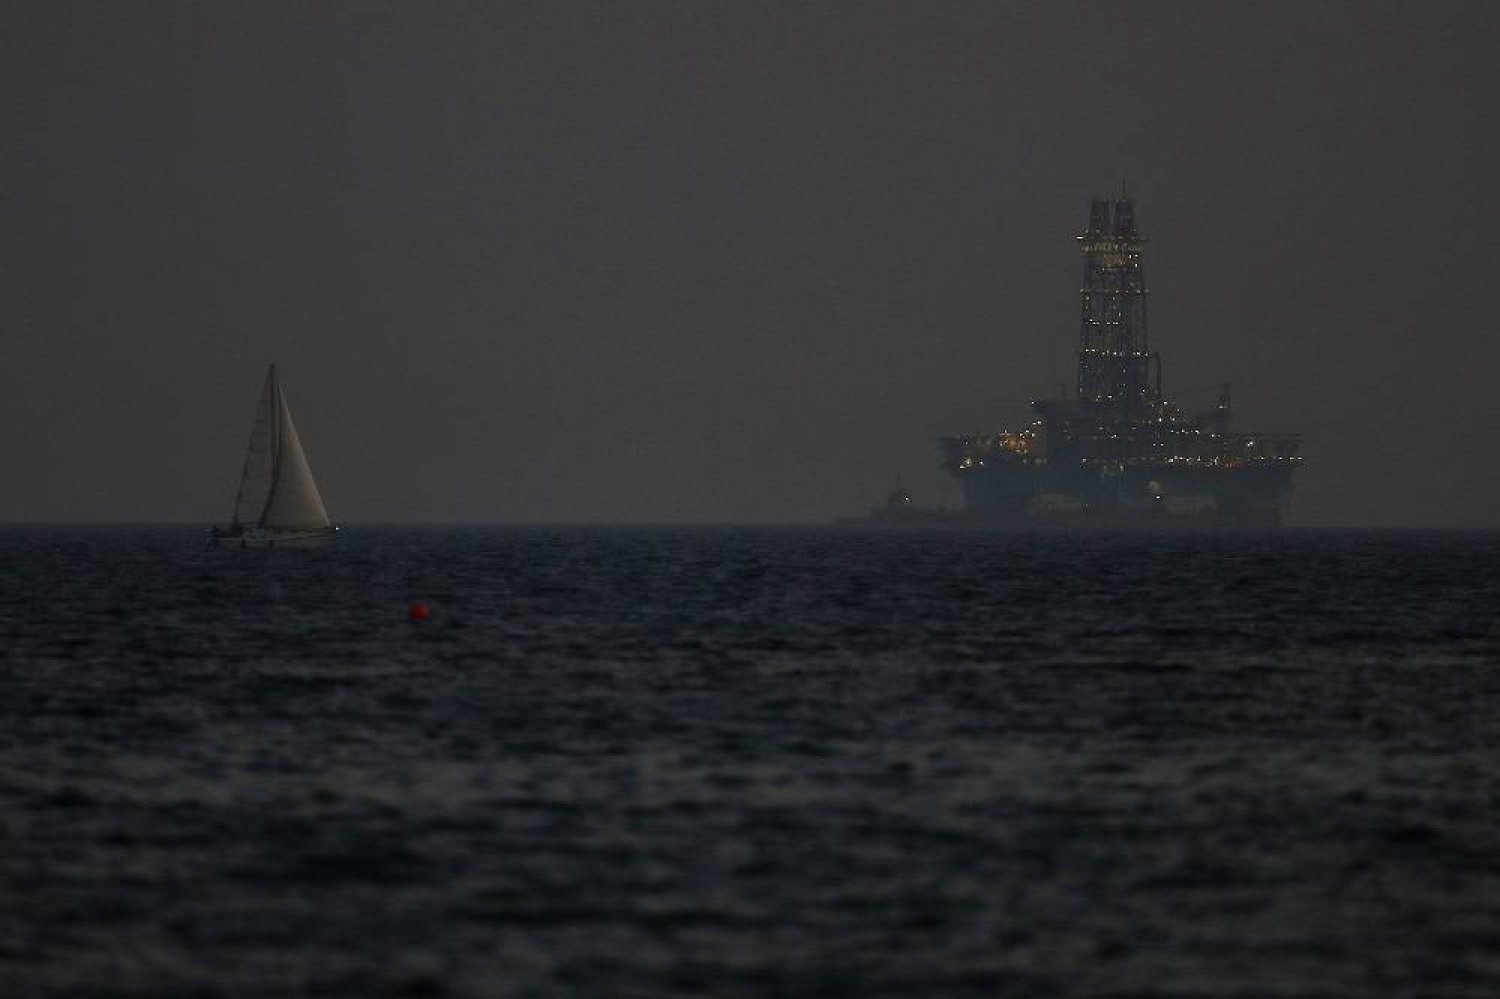 An offshore drilling rig is seen in the waters off Cyprus' coastal city of Limassol, on July 5, 2020 as a sailboat sails in the foreground. (AP)